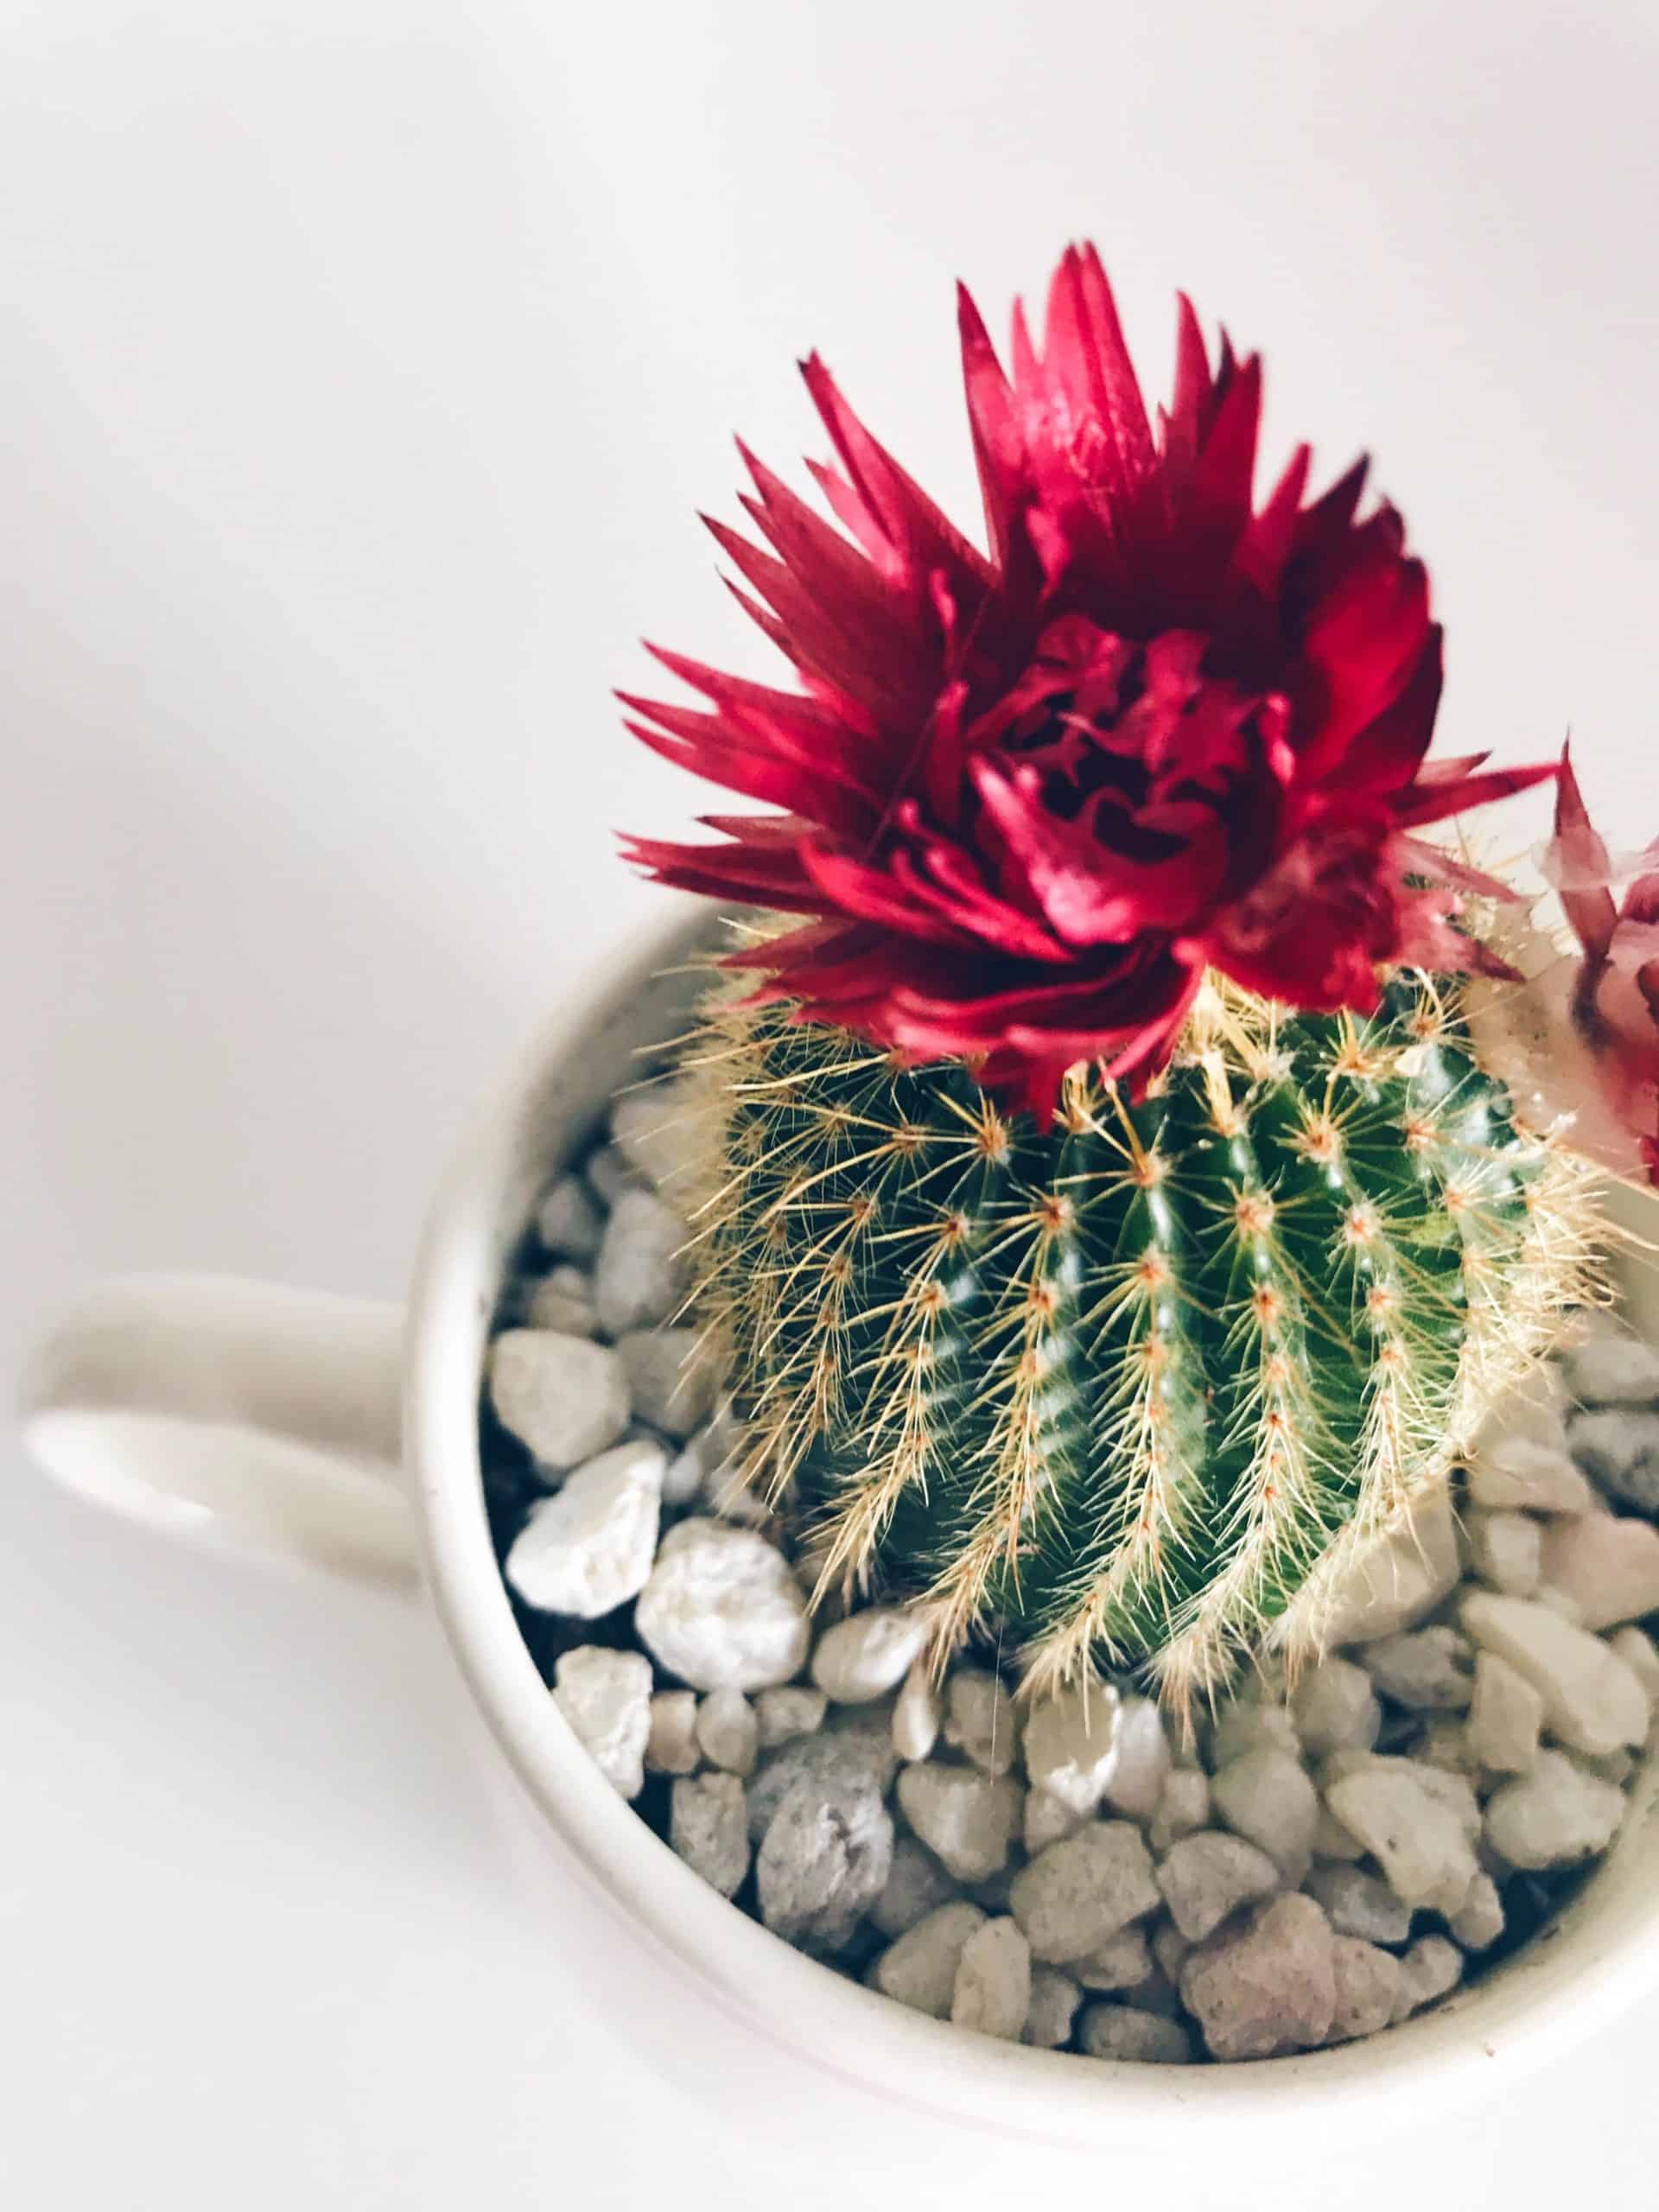 Flowering cactus in a white cup as a pot.